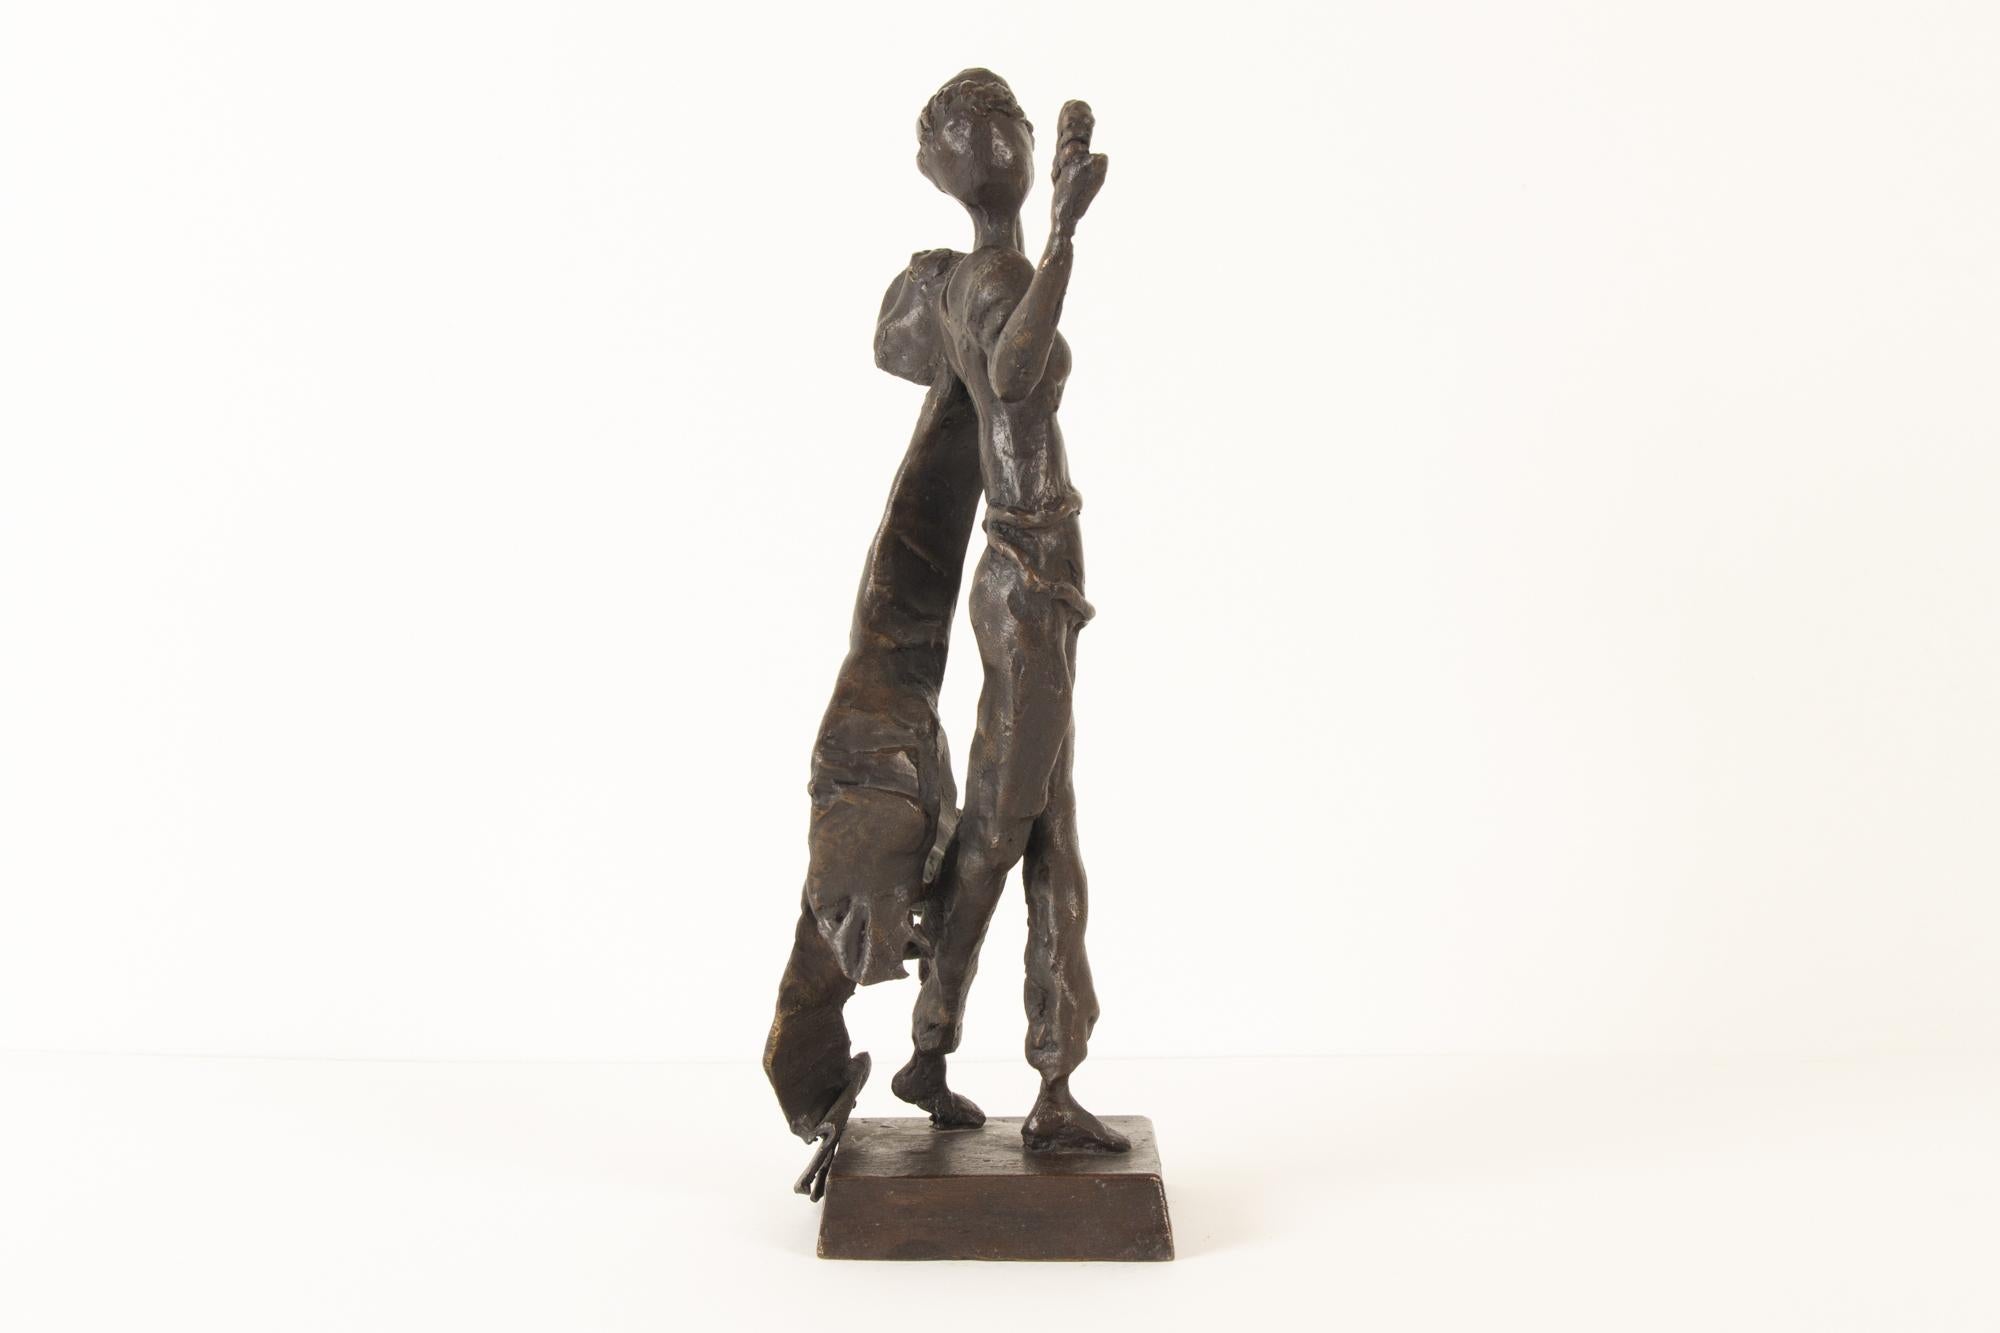 Bronze sculpture by Dutch sculptor Rob Cerneüs (1943-2021)
Figurine depicting a woman with flowing garments. Signature on base.